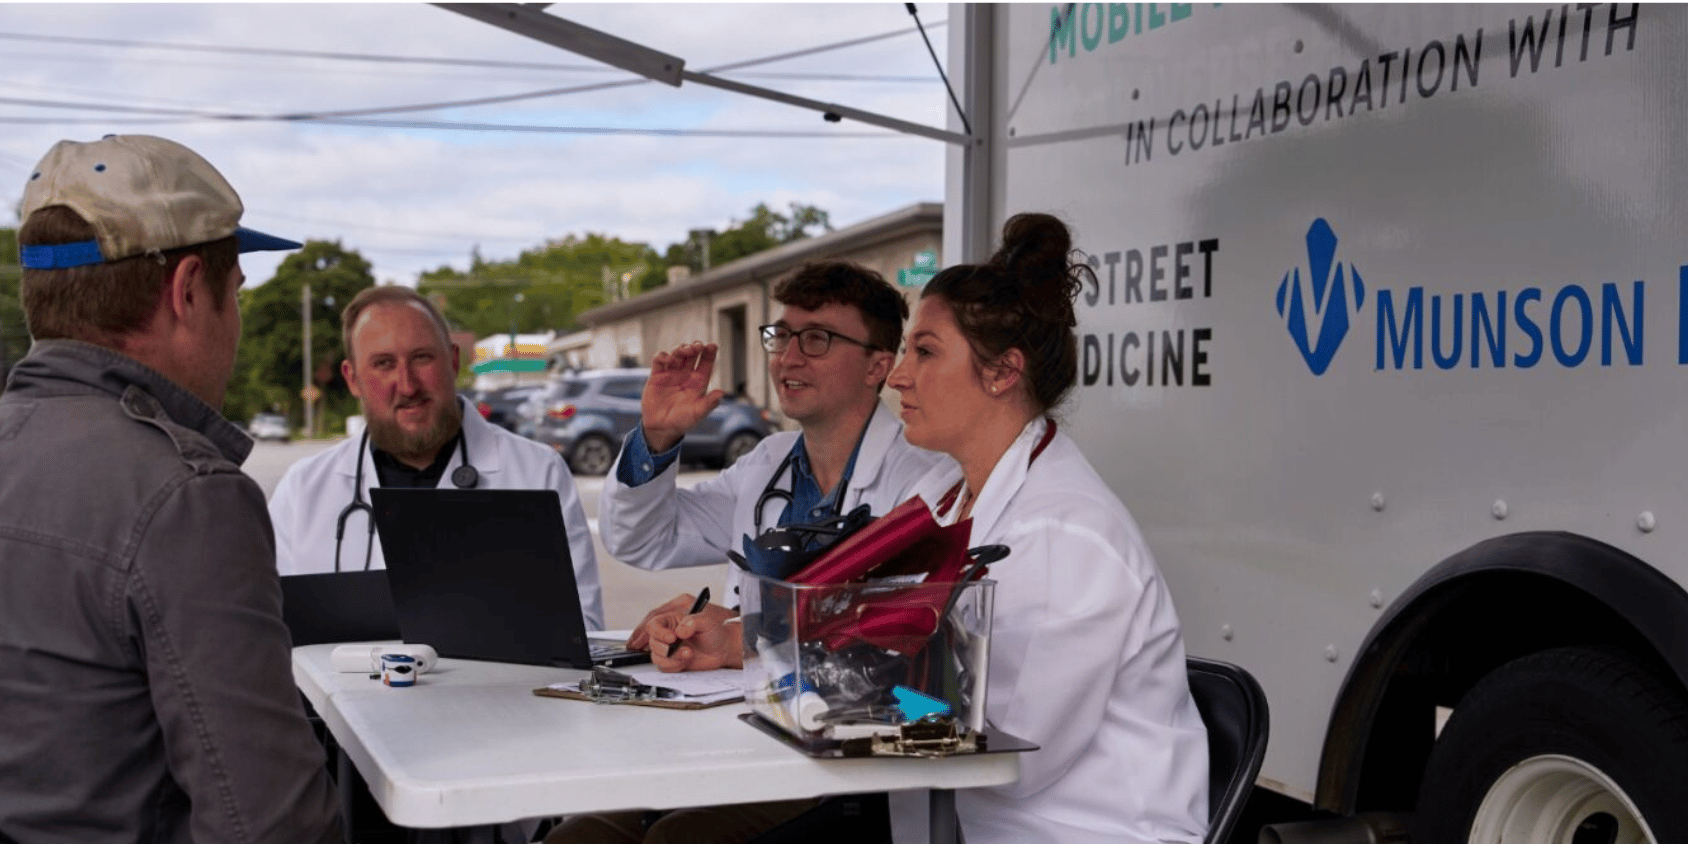 Students consulting a patient in front of the mobile health unit.